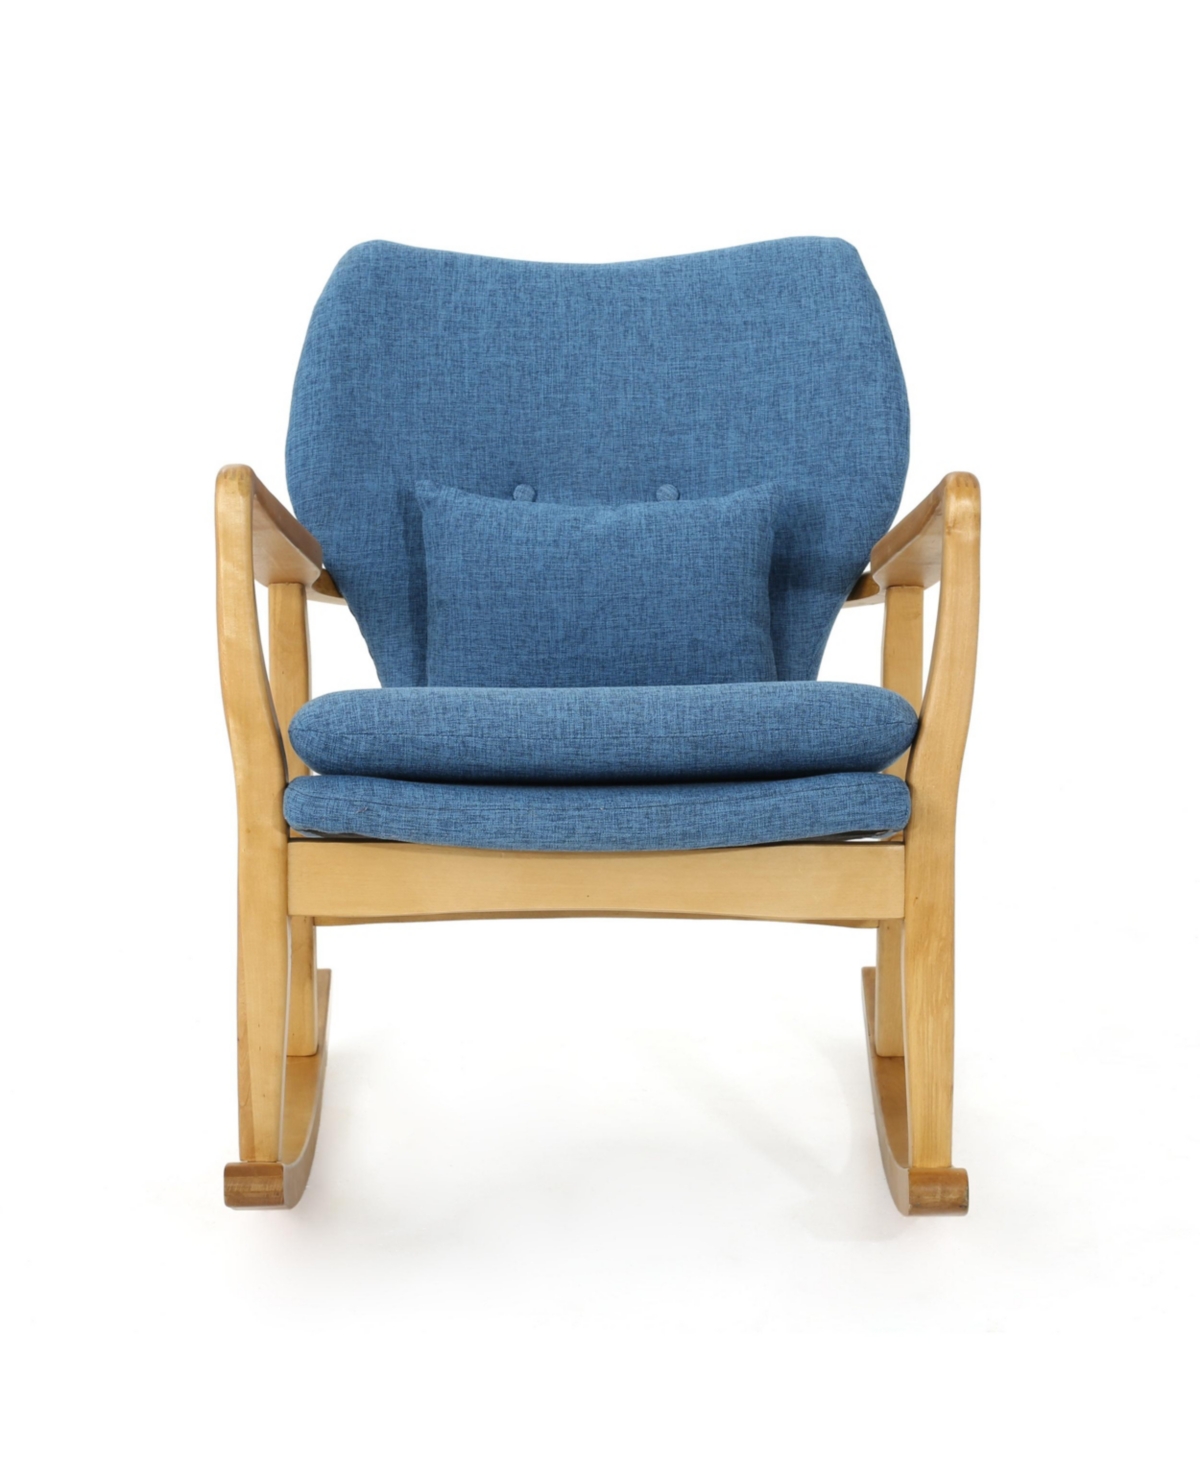 Noble House Benny Mid-century Modern Tufted Rocking Chair With Accent Pillow In Muted Blue